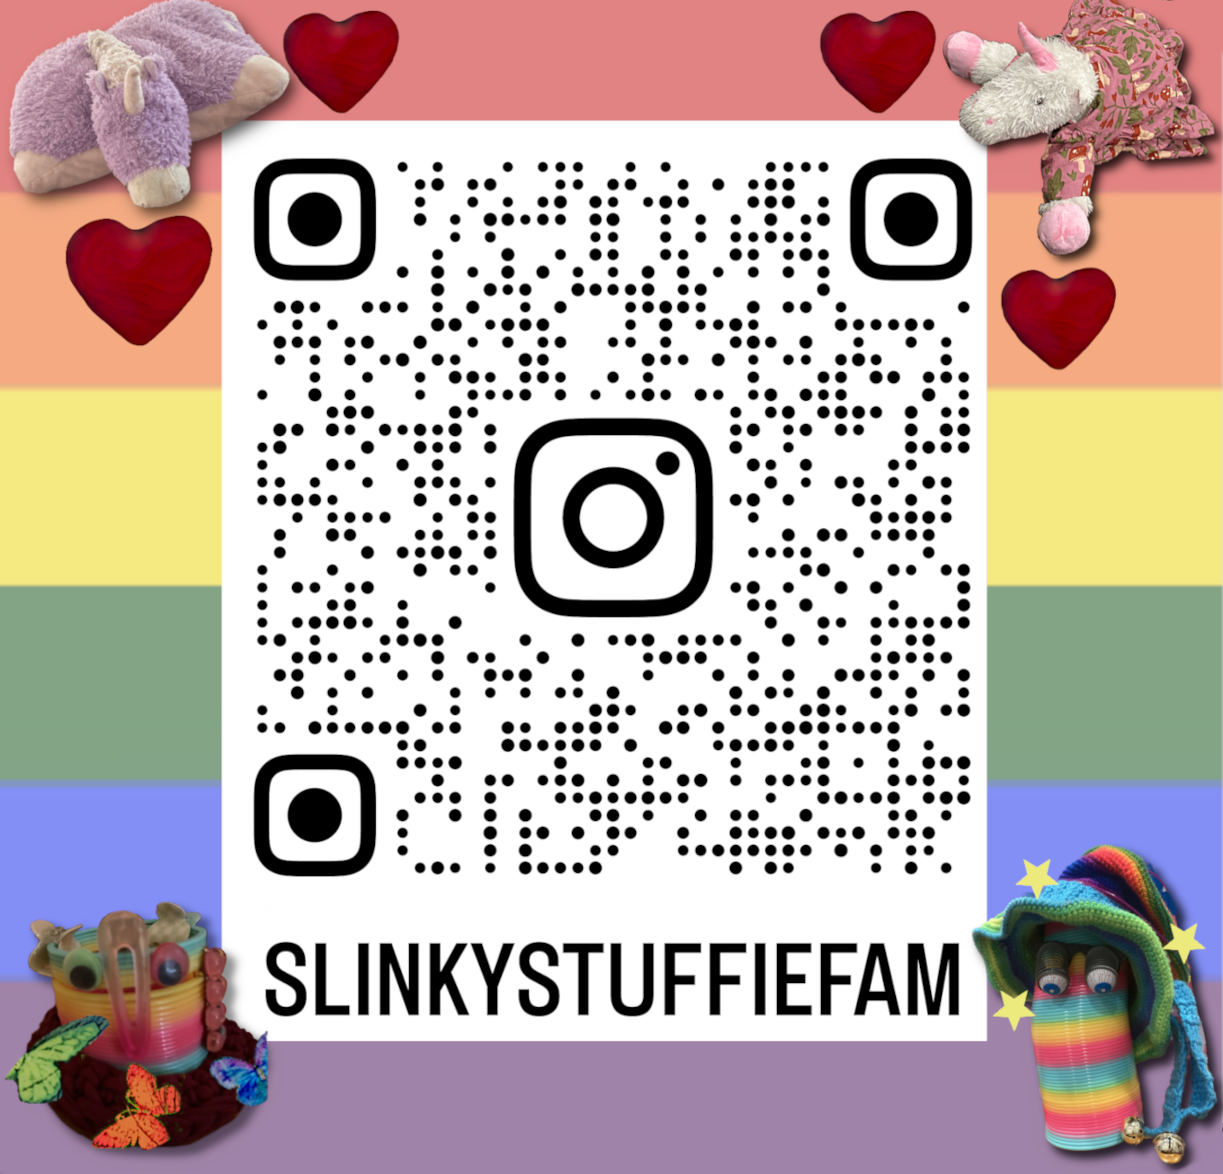 QR code to slinkiestuffiefam instagram, surrounded by rainbow background and sprites